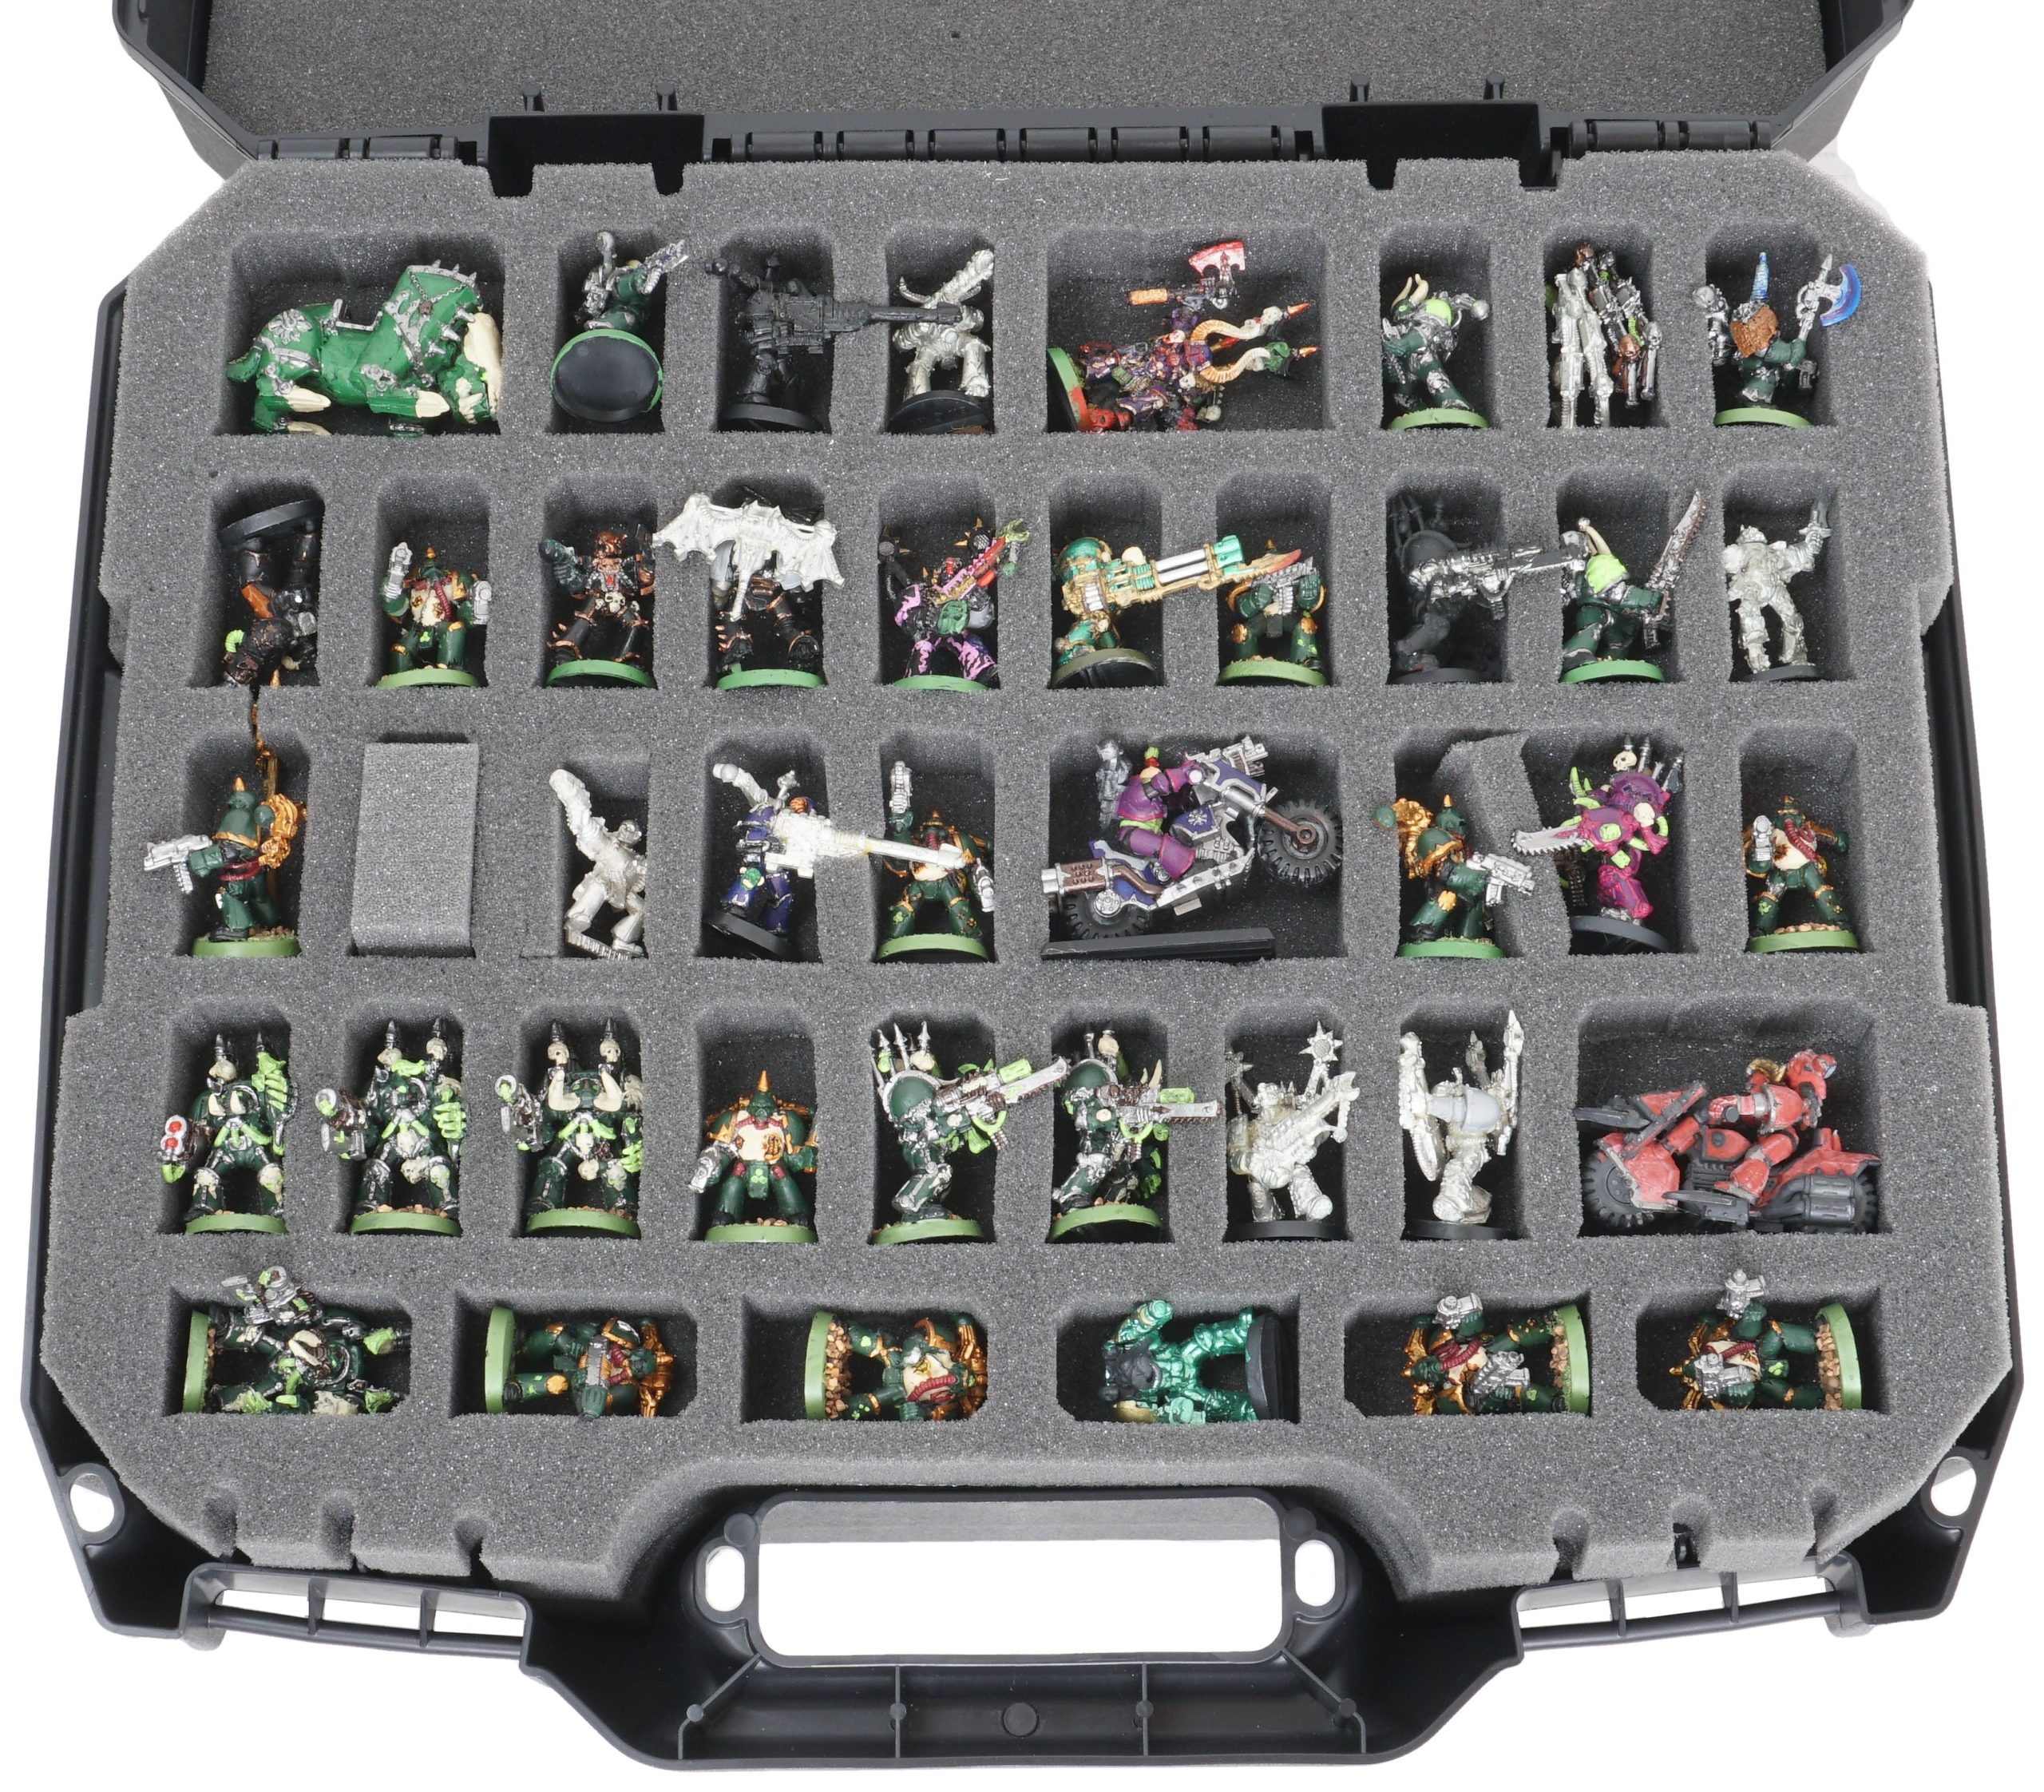 Case Club 123+ Miniature Figurine Hard Shell Carrying Case - Fits Warhammer 40K, Dnd, Battletech, Citadel & More! This Tabletop Army Travel 